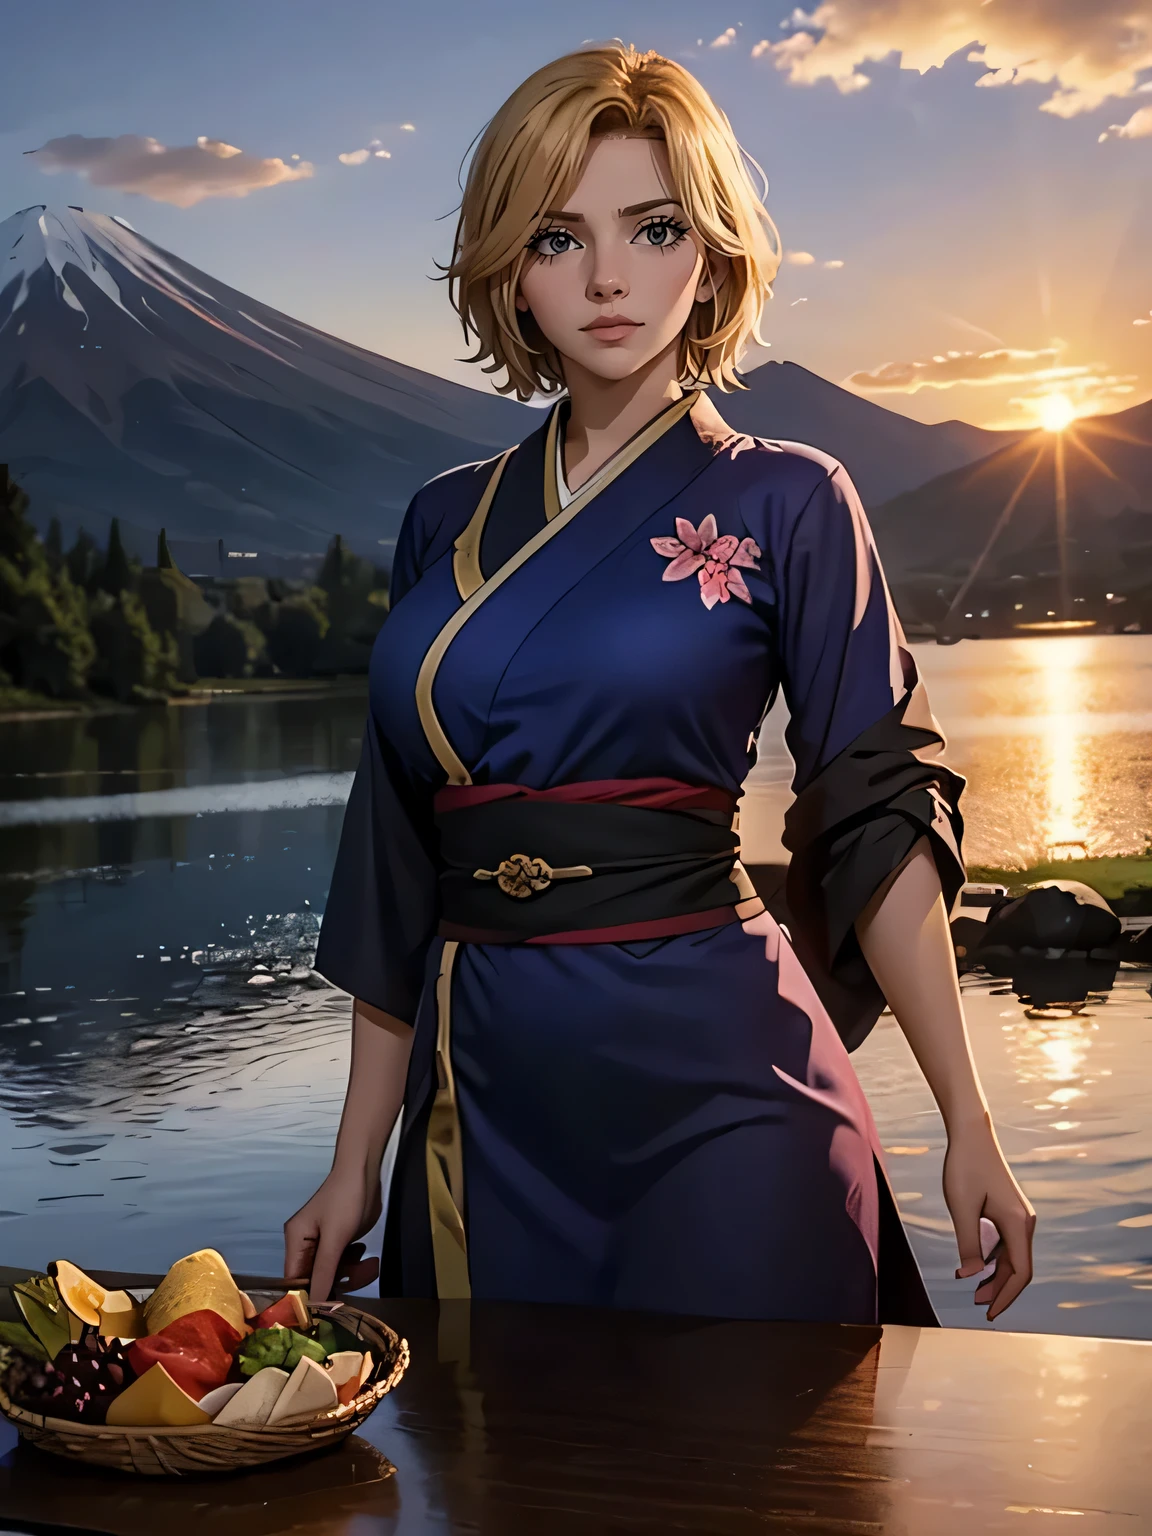 Best quality, masterpiece, extremely detailed, detailed background, detailed eyes,realism, 1 girl, beautiful eyes, young girl,beautiful graceful fingers, girl with short hair,expressive face, kimono, big breasts , Landscape of Mount Fuji, on open air, sunset, beautiful sky, picnic on the lake, landscape, landscape, horizon, The mountain is next to the mountain, Wind, flower petal, Vesna, looking, Atmospheric lighting, reflection, naturalistic, detail, realism. relaxation, Beauty, Just focus, Close-up, outside, depth of field, hips